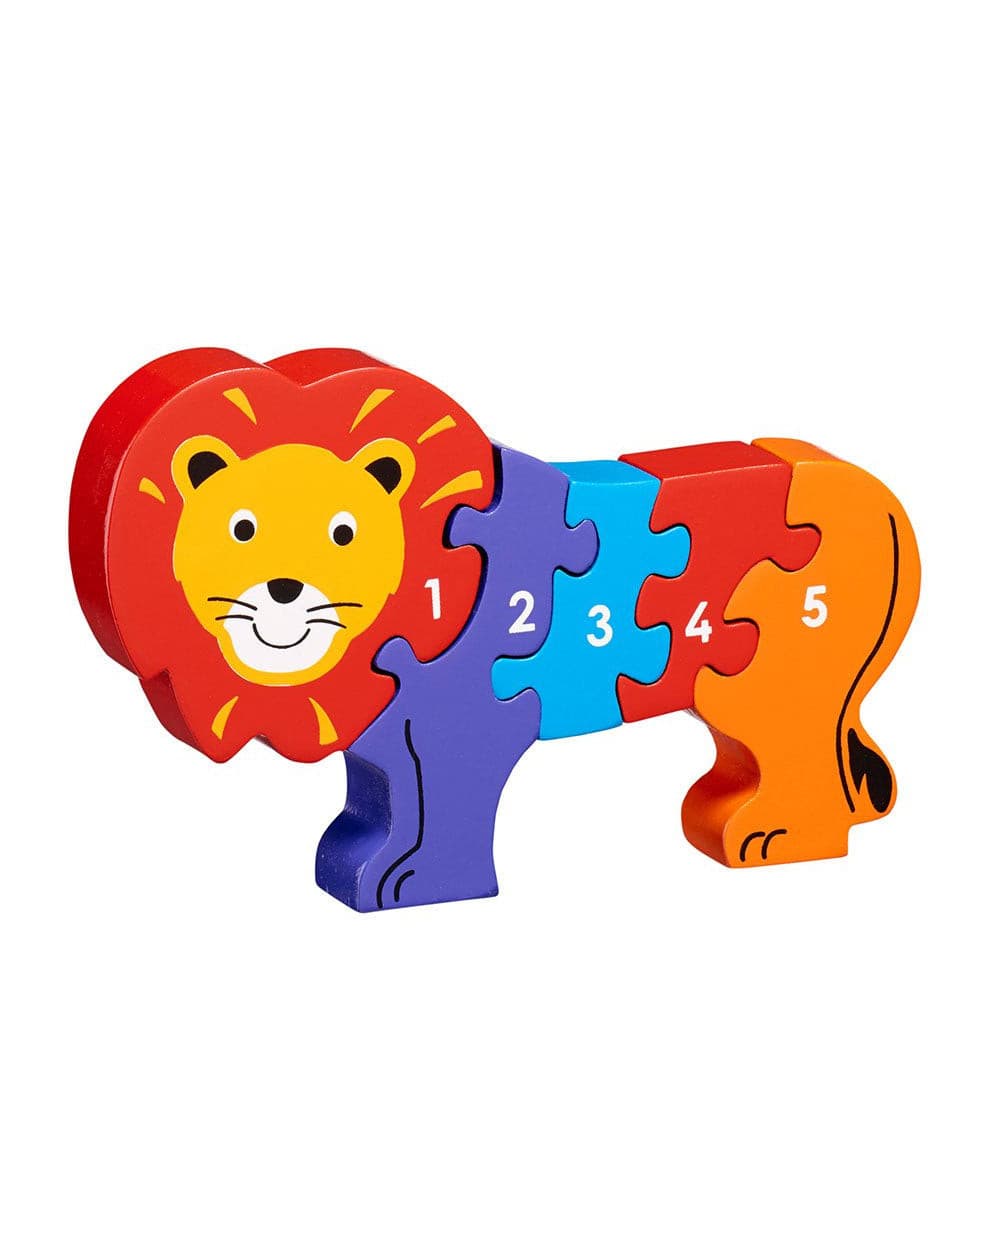 Lanka Kade Wooden Lion 1-5 Counting Puzzle